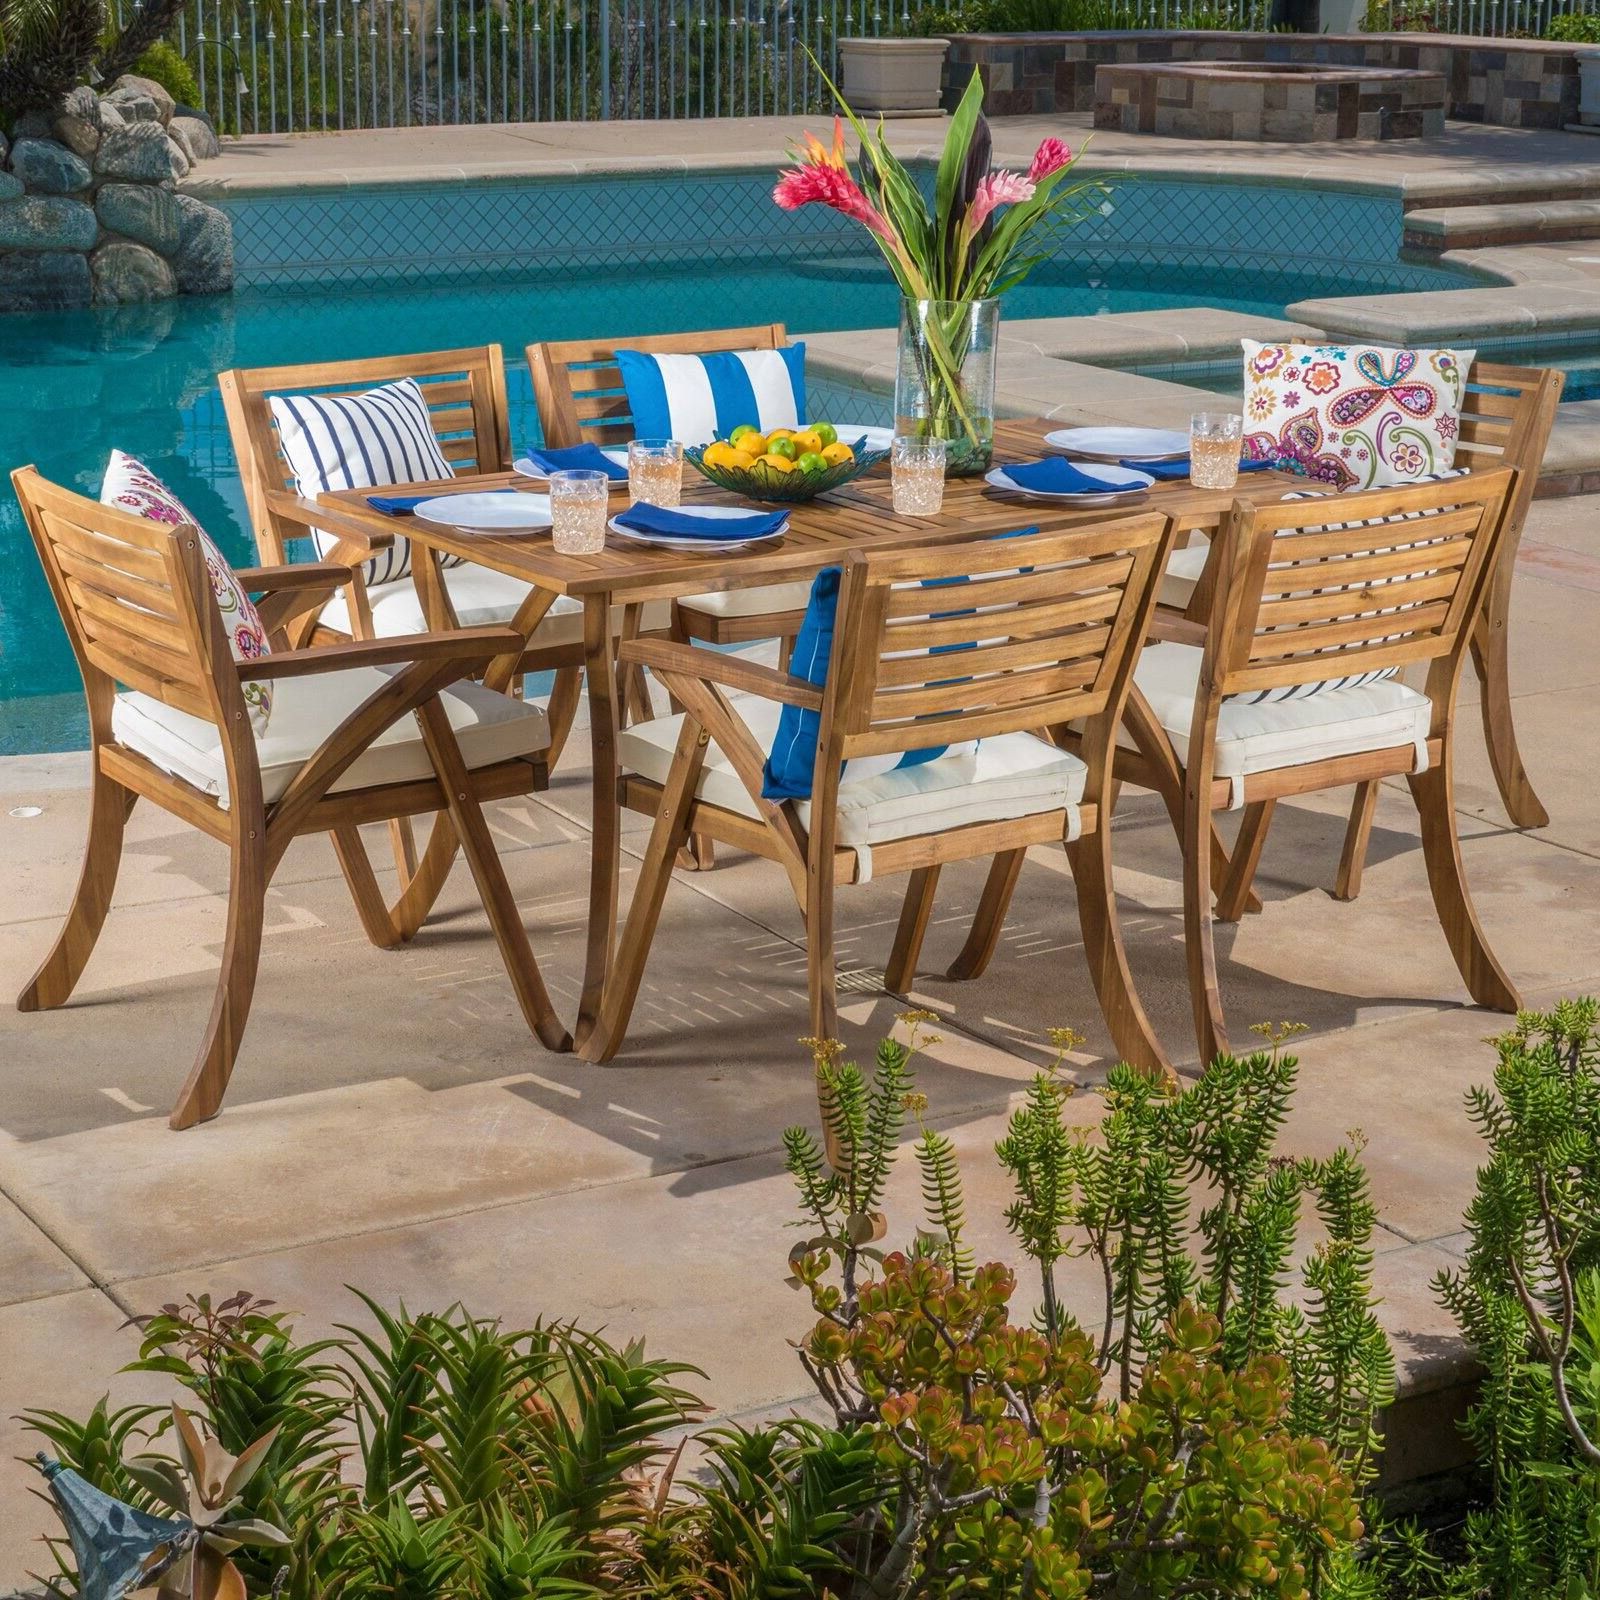 7 Piece Rectangular Patio Dining Sets Within 2020 Naomi Wood 7 Piece Rectangular Patio Dining Set With Cushions – Walmart (View 4 of 15)